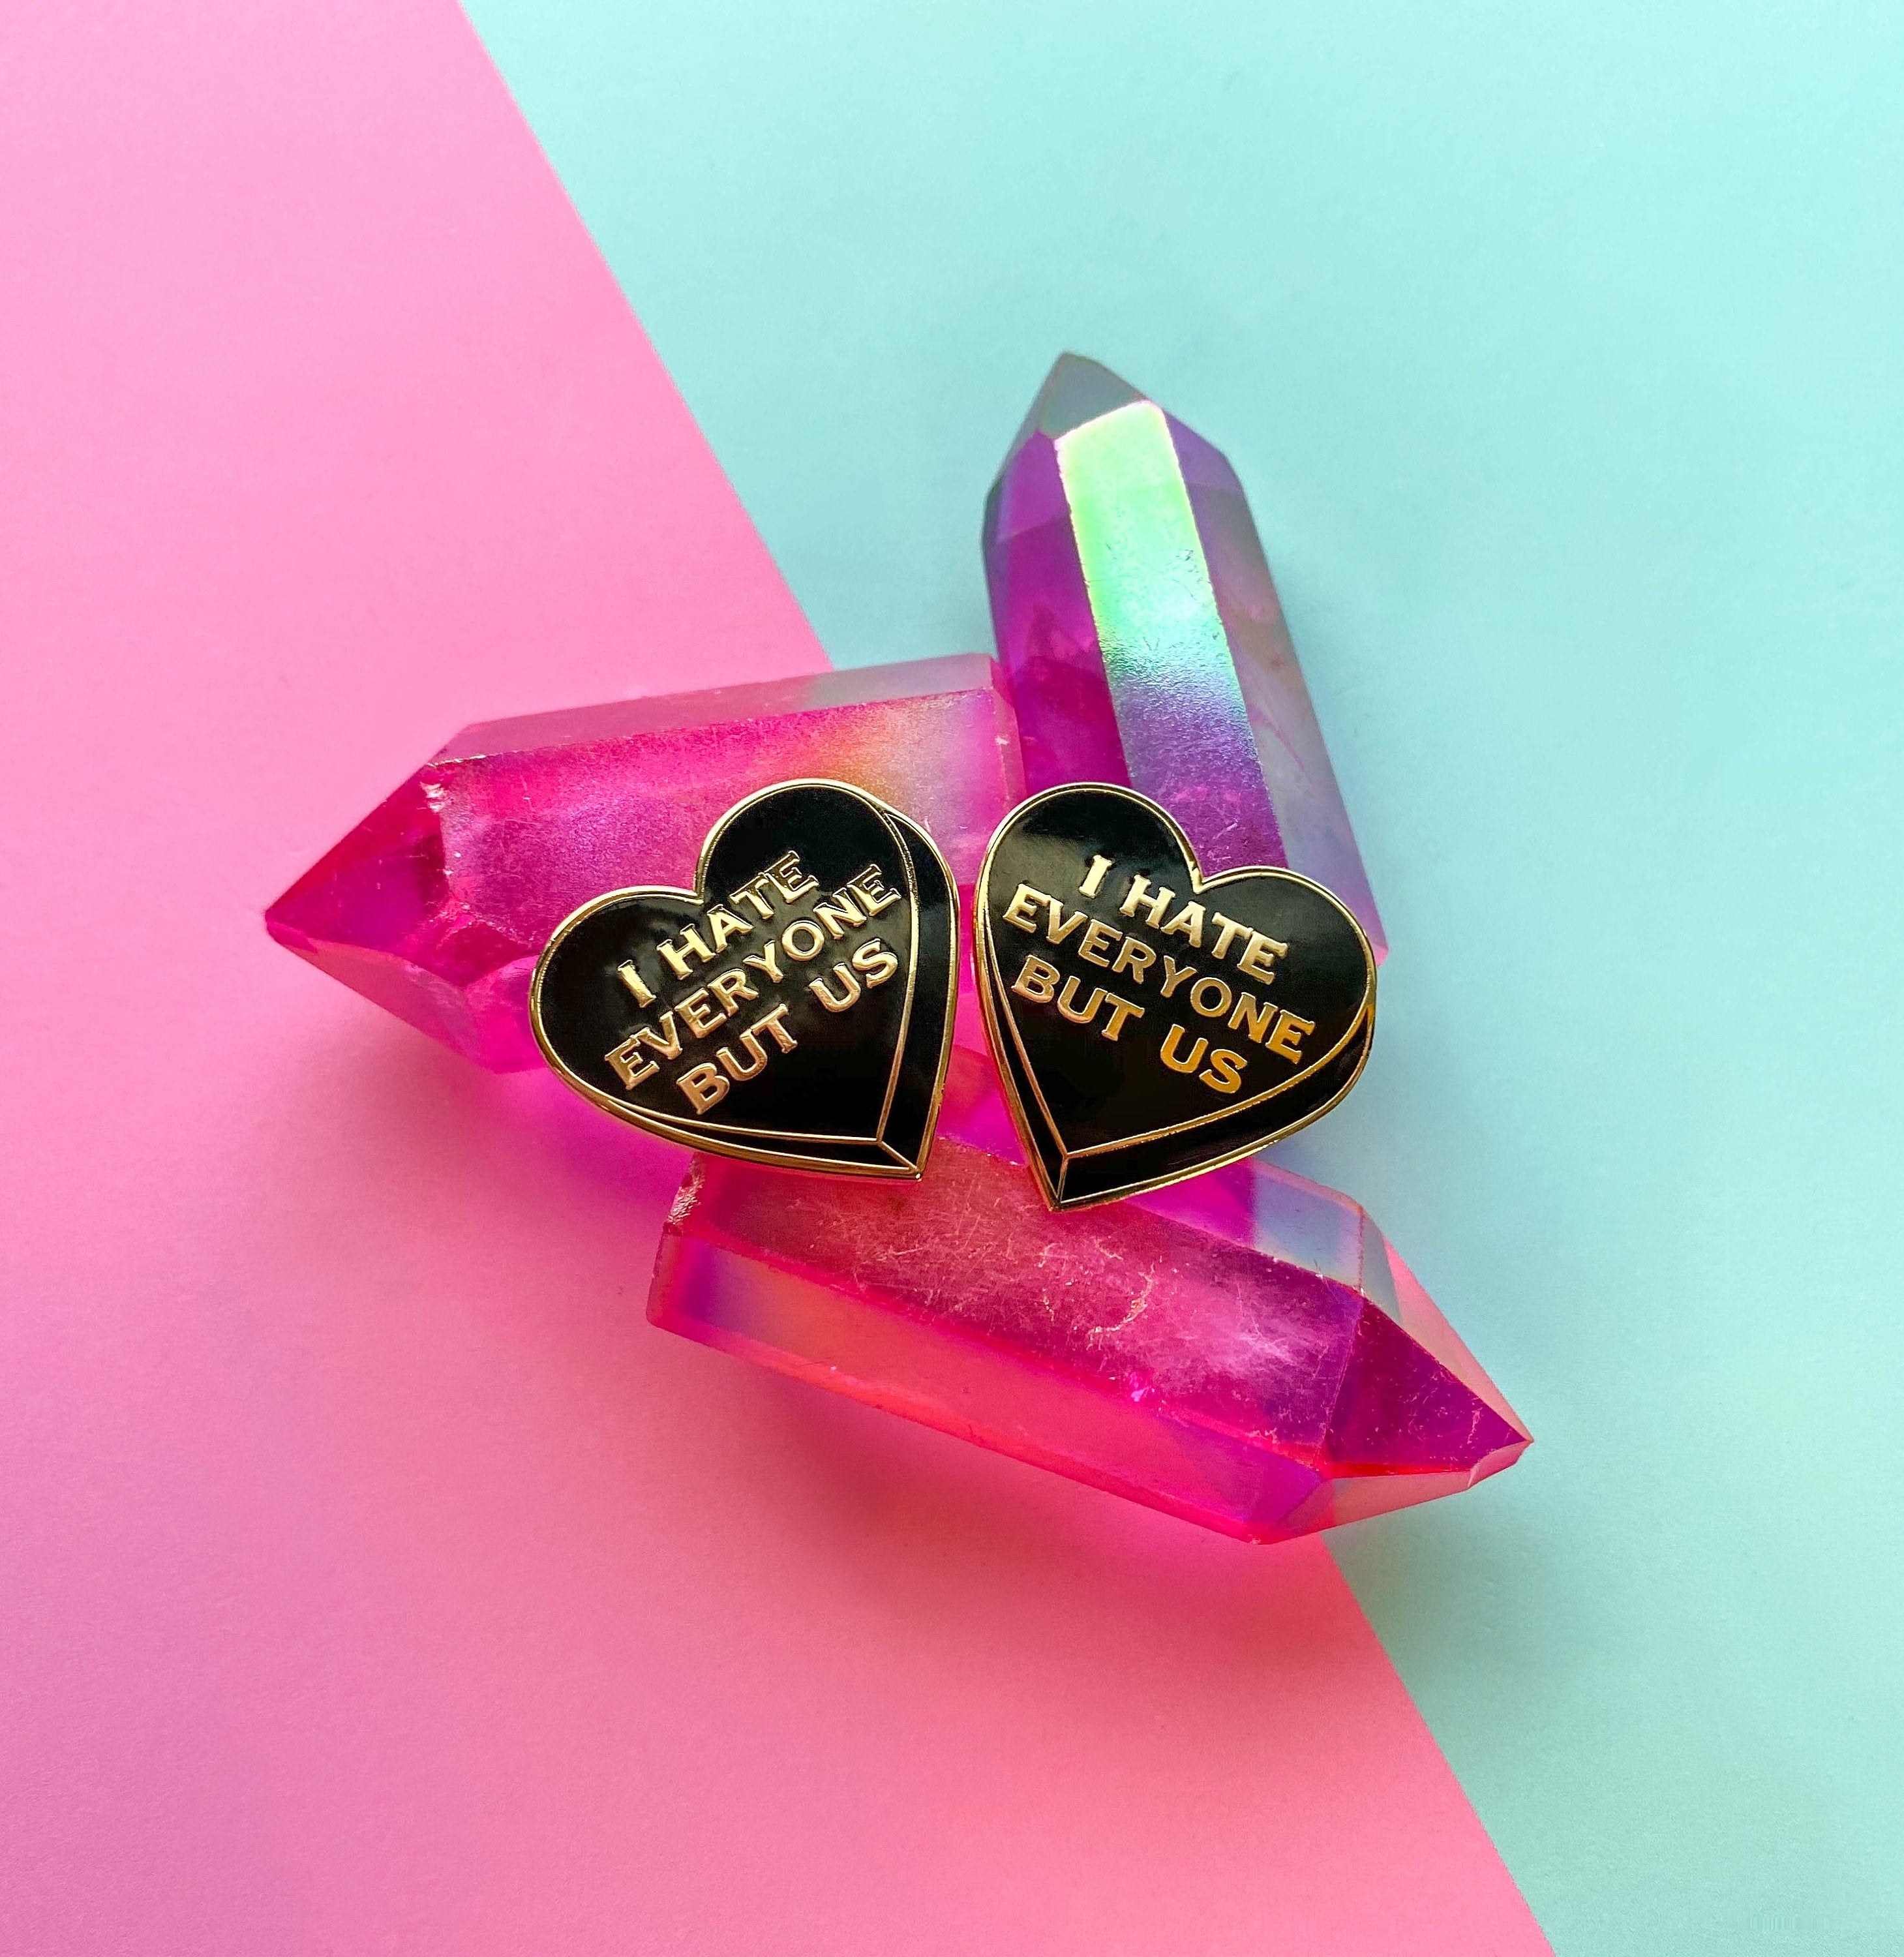 two black heart-shaped pins with &quot;i hate everyone but us&quot; written on them in gold